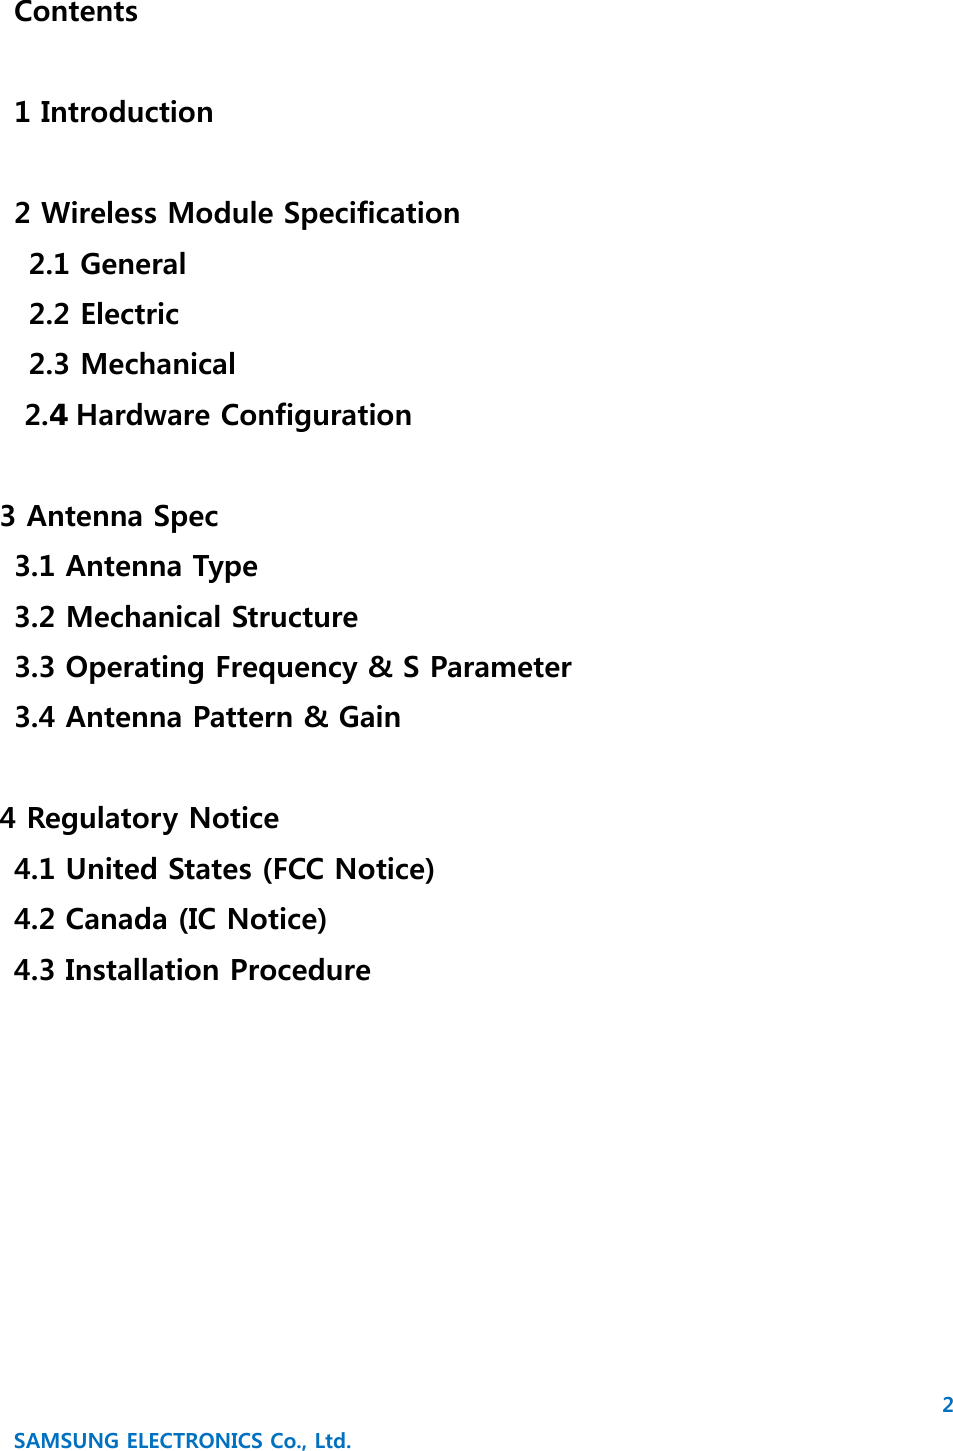 2 SAMSUNG ELECTRONICS Co., Ltd. Contents  1 Introduction  2 Wireless Module Specification  2.1 General   2.2 Electric   2.3 Mechanical     2. Hardware Configuration  3 Antenna Spec   3.1 Antenna Type   3.2 Mechanical Structure   3.3 Operating Frequency &amp; S Parameter   3.4 Antenna Pattern &amp; Gain  4 Regulatory Notice   4.1 United States (FCC Notice)   4.2 Canada (IC Notice)   4.3 Installation Procedure       